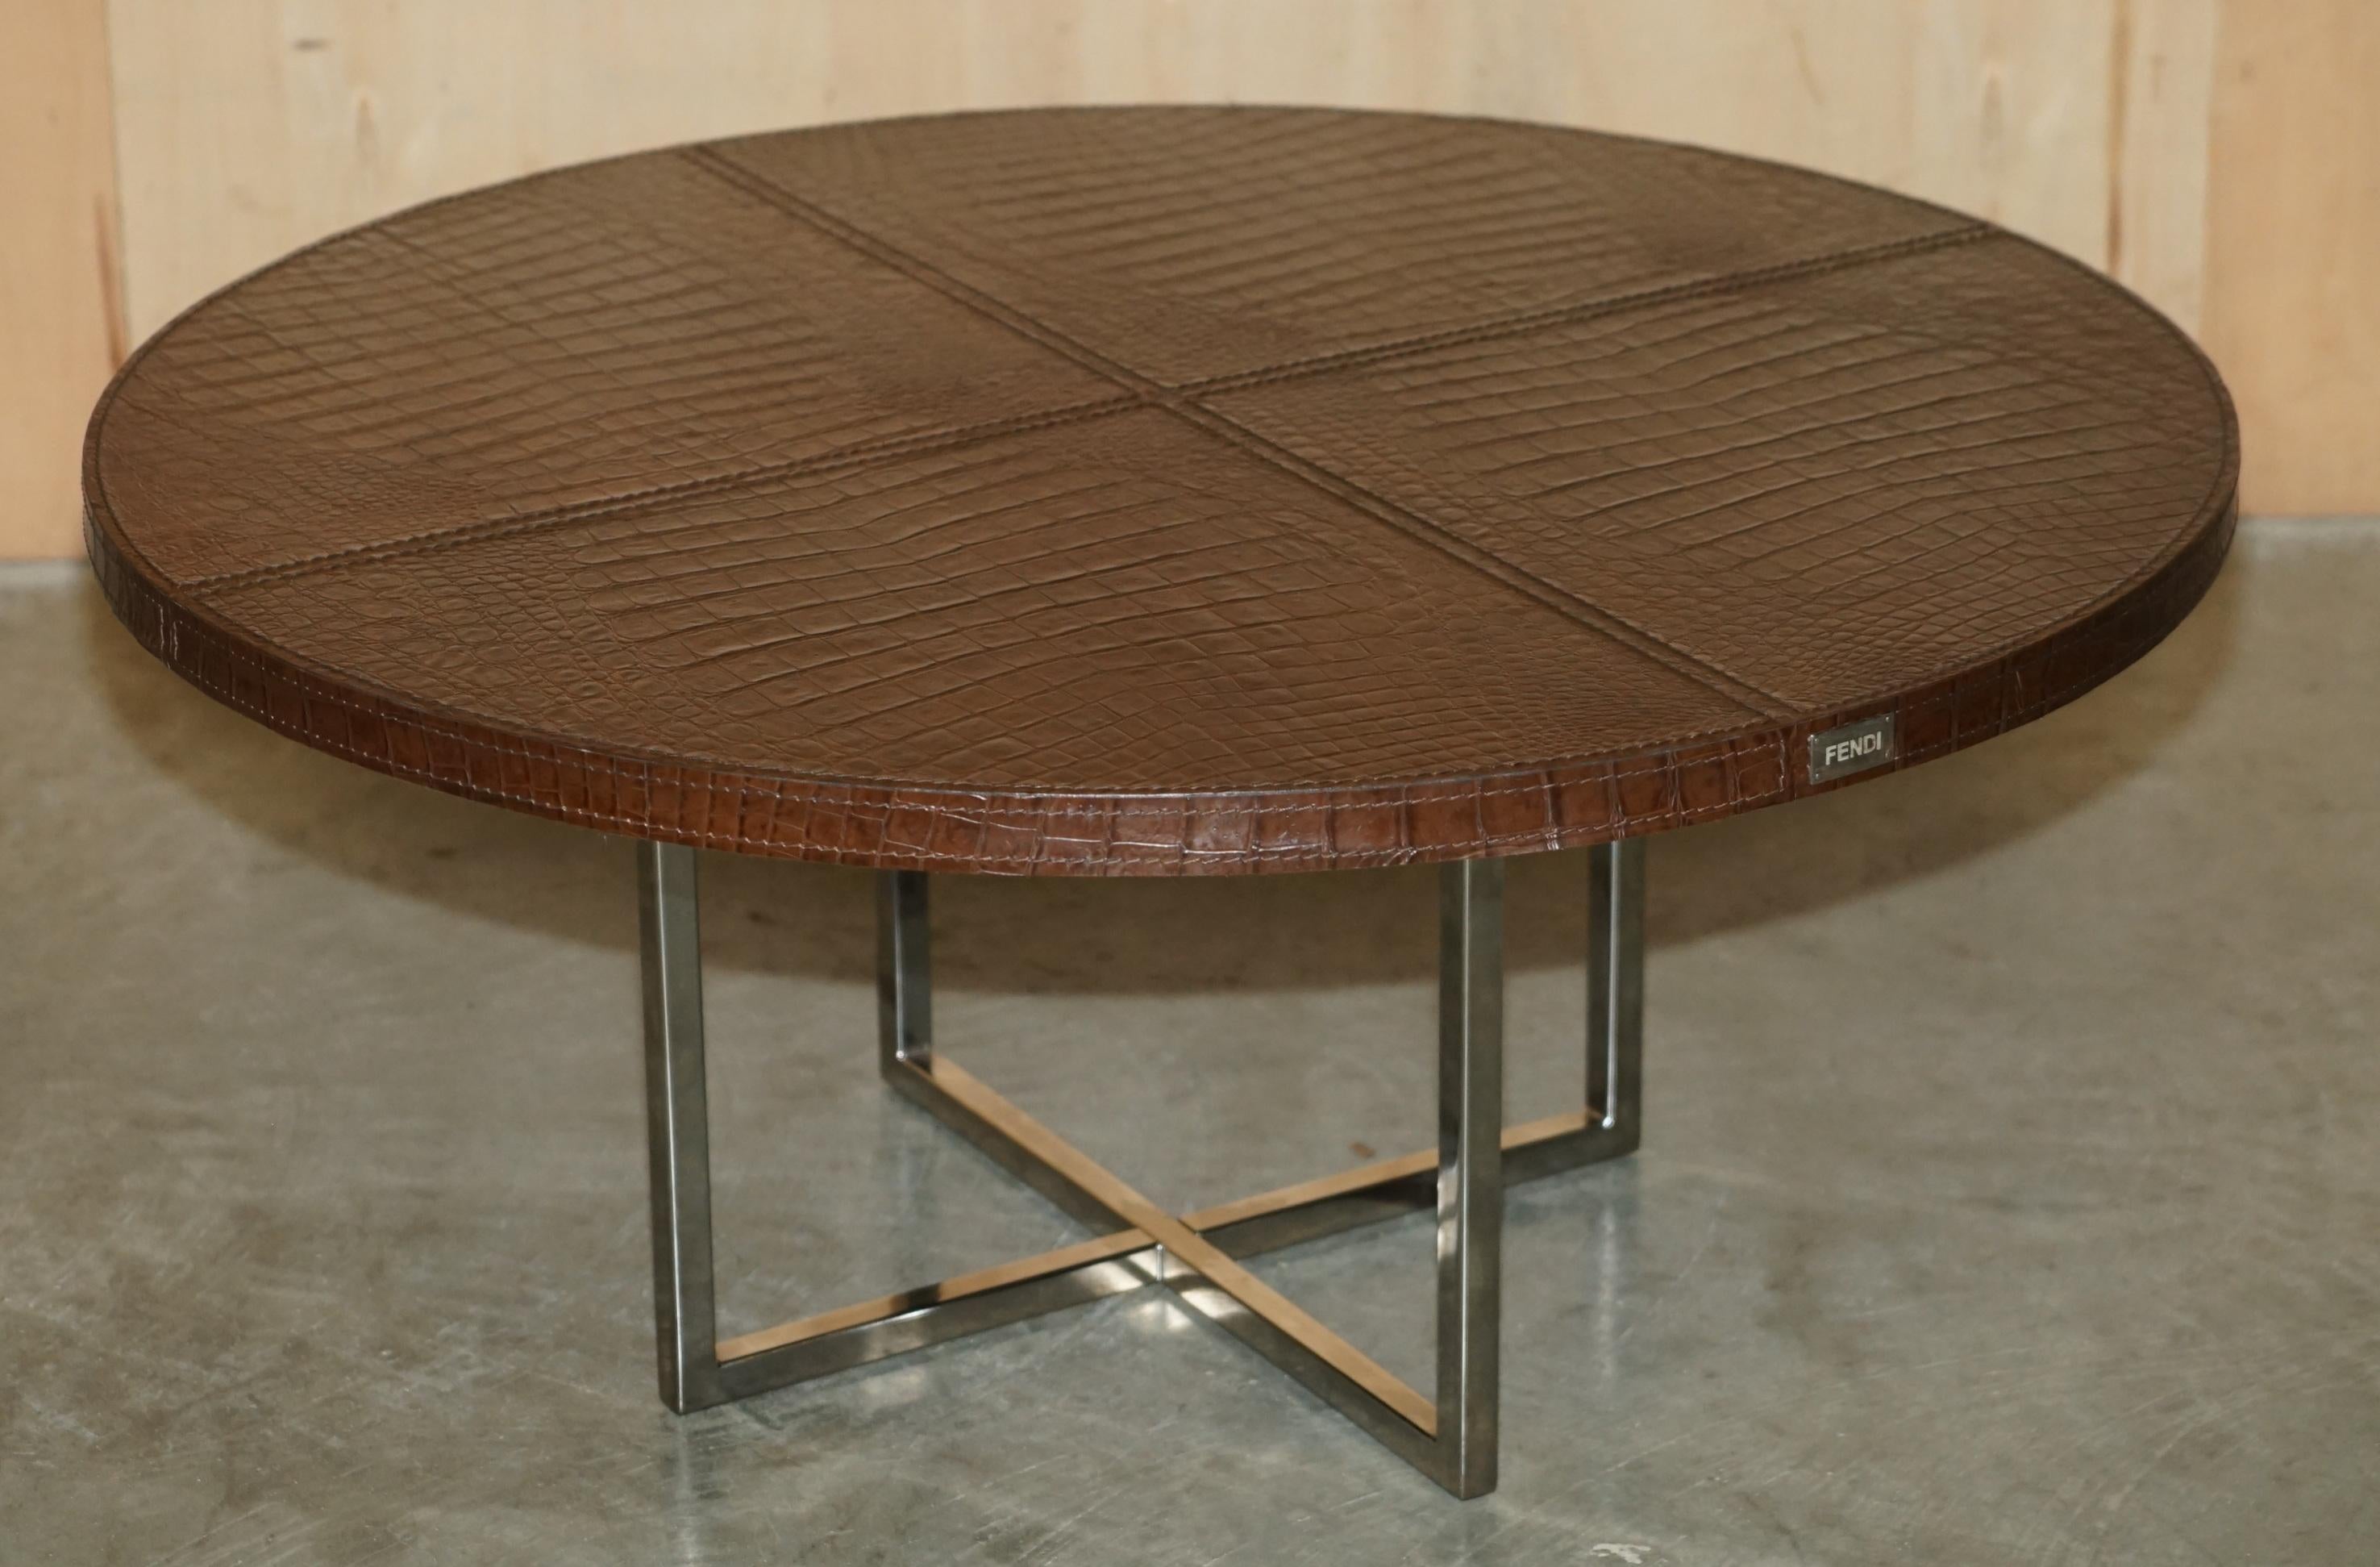 Hand-Crafted STUNNiNG FENDI CROCODILE / ALLIGATOR BROWN LEATHER PATINA COFFEE COCKTAIL TABLE For Sale